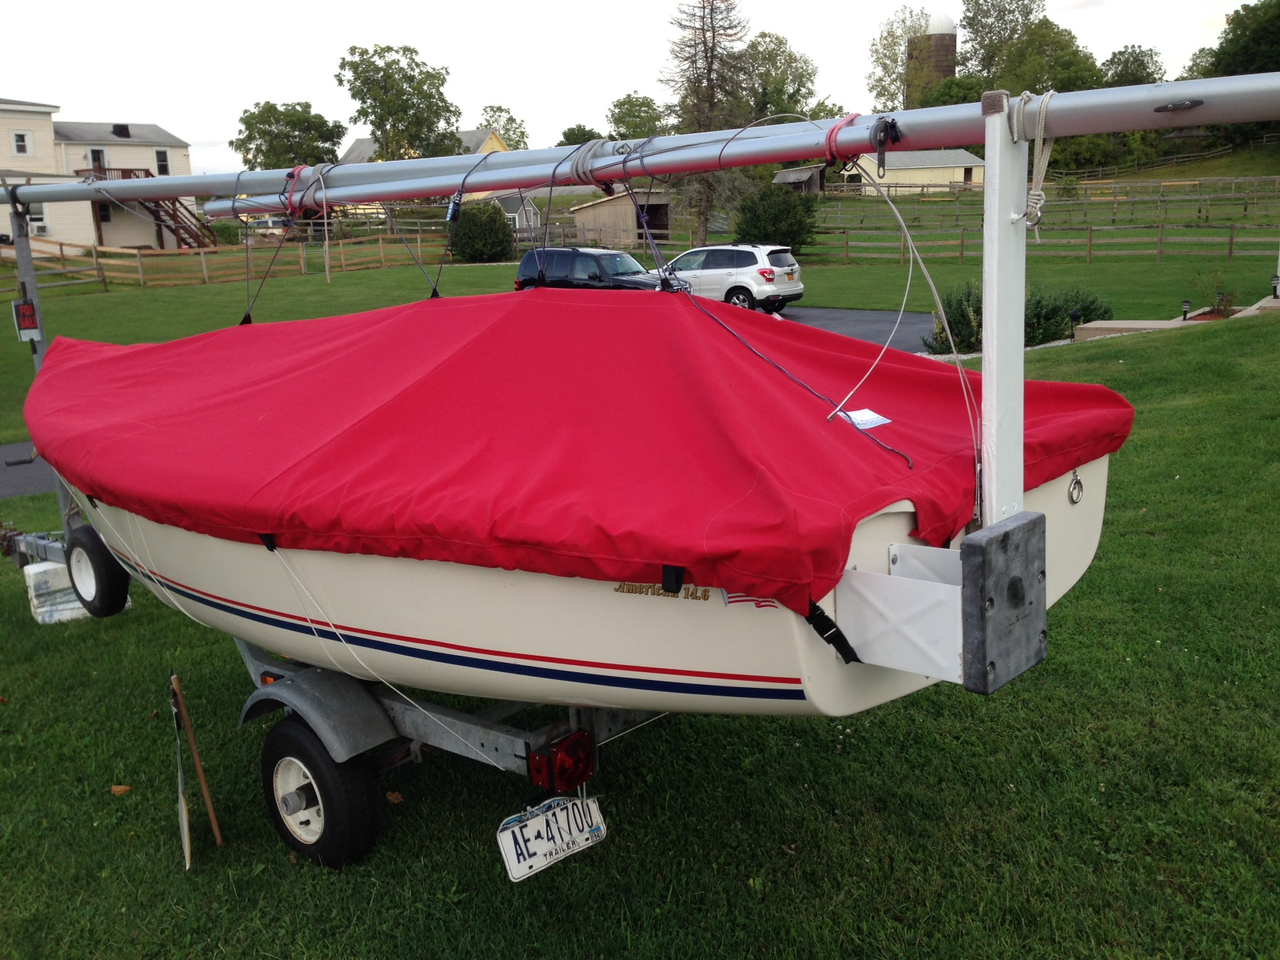 American 14.6 Top Deck Cover by SLO Sail and Canvas. Shown in Sunbrella Jockey Red. 